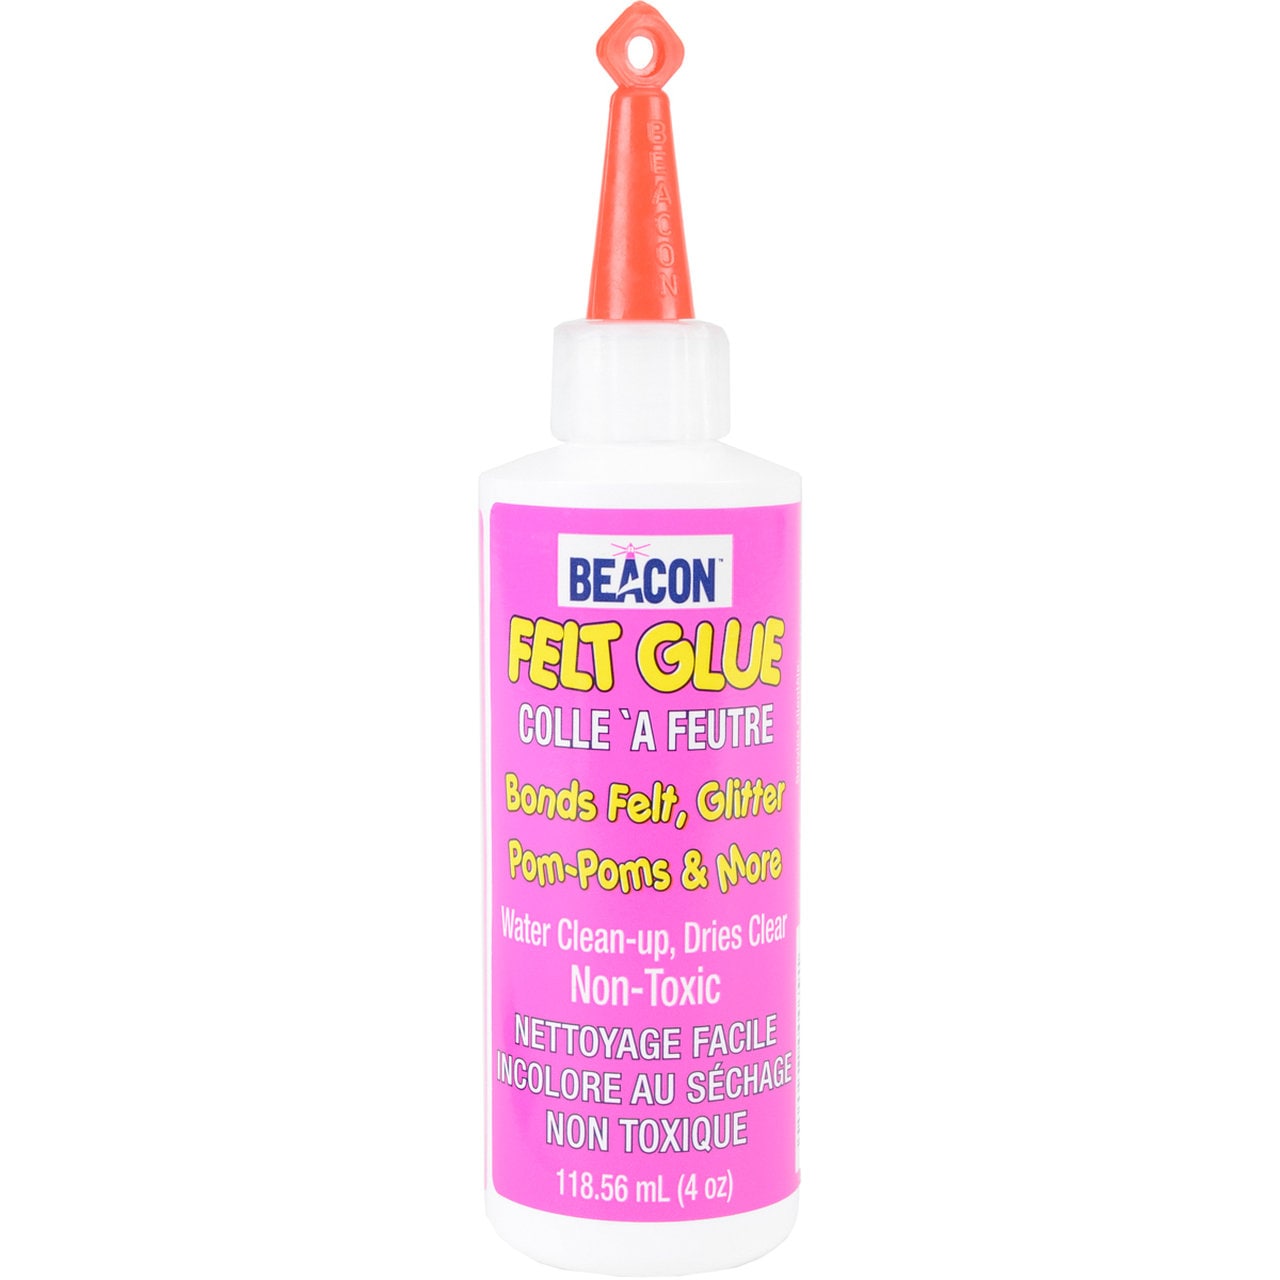 Fabric Fusion Fabric Glue Permanent Clear Washable 2oz for Patches, Rug  Glue, Clothing Glue, No Sew Fabric Glue With Pixiss Art Dotting -   Hong Kong